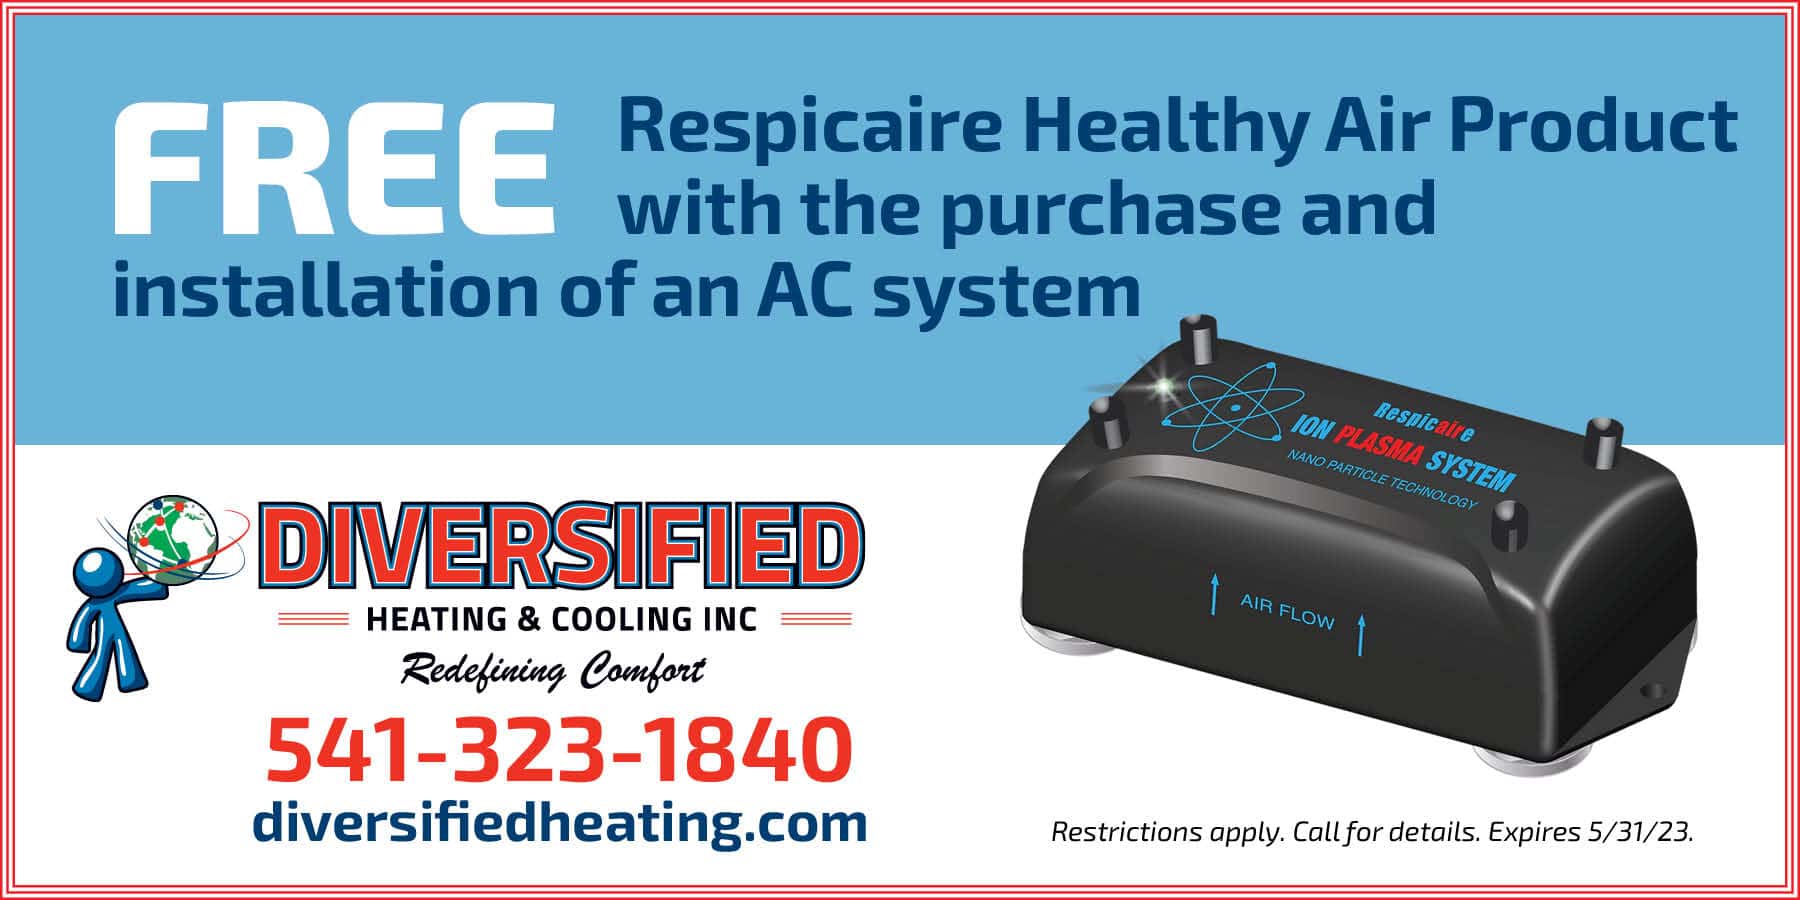 Free Respicaire healthy air product with the purchase and installation of an AC system